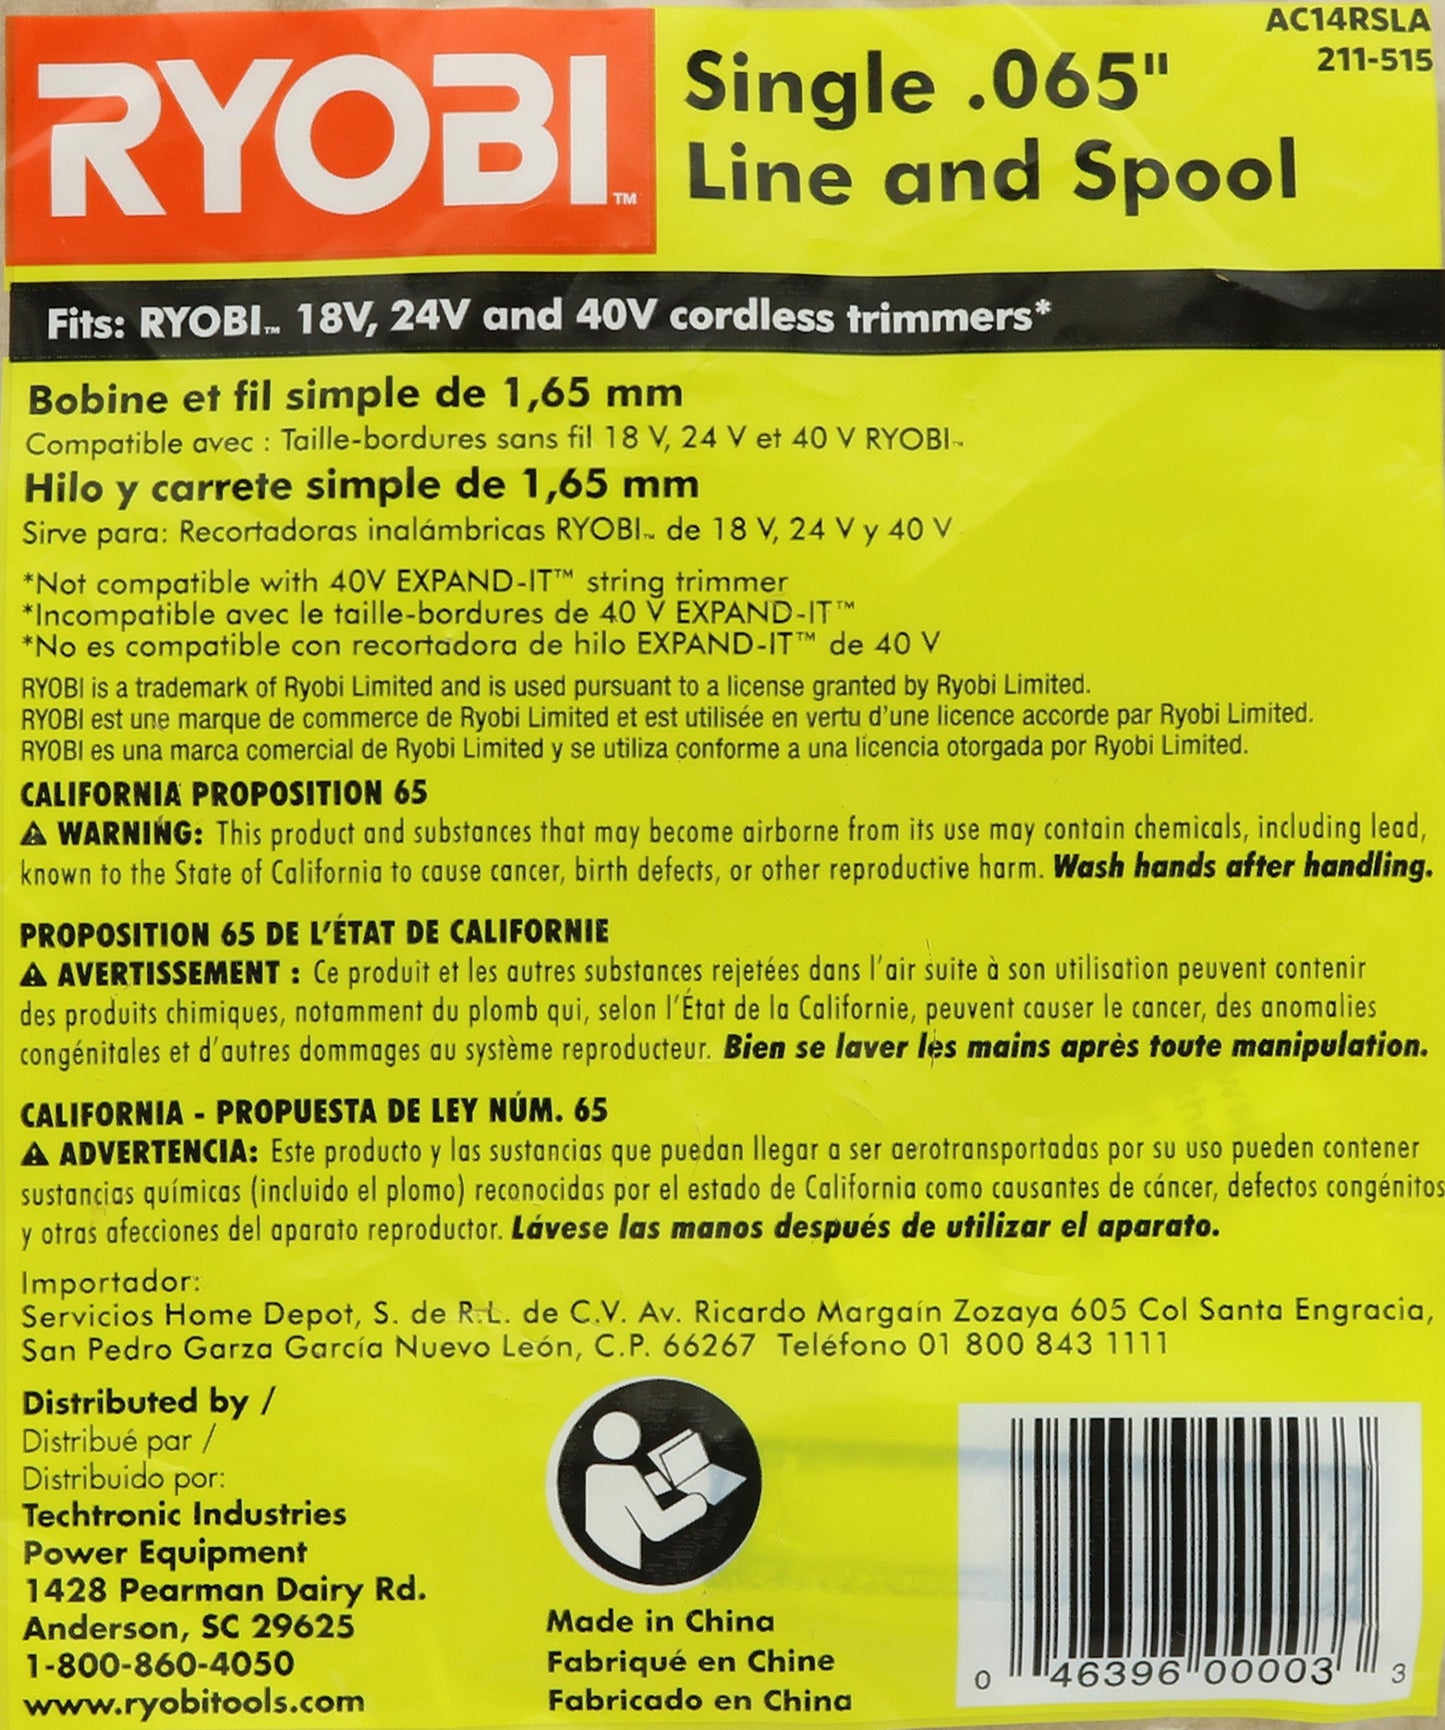 Ryobi ONE+ AC14RSLA OEM .065" Line and Spool Replacement for Ryobi 18v, 24v, and 40v Cordless Trimmers